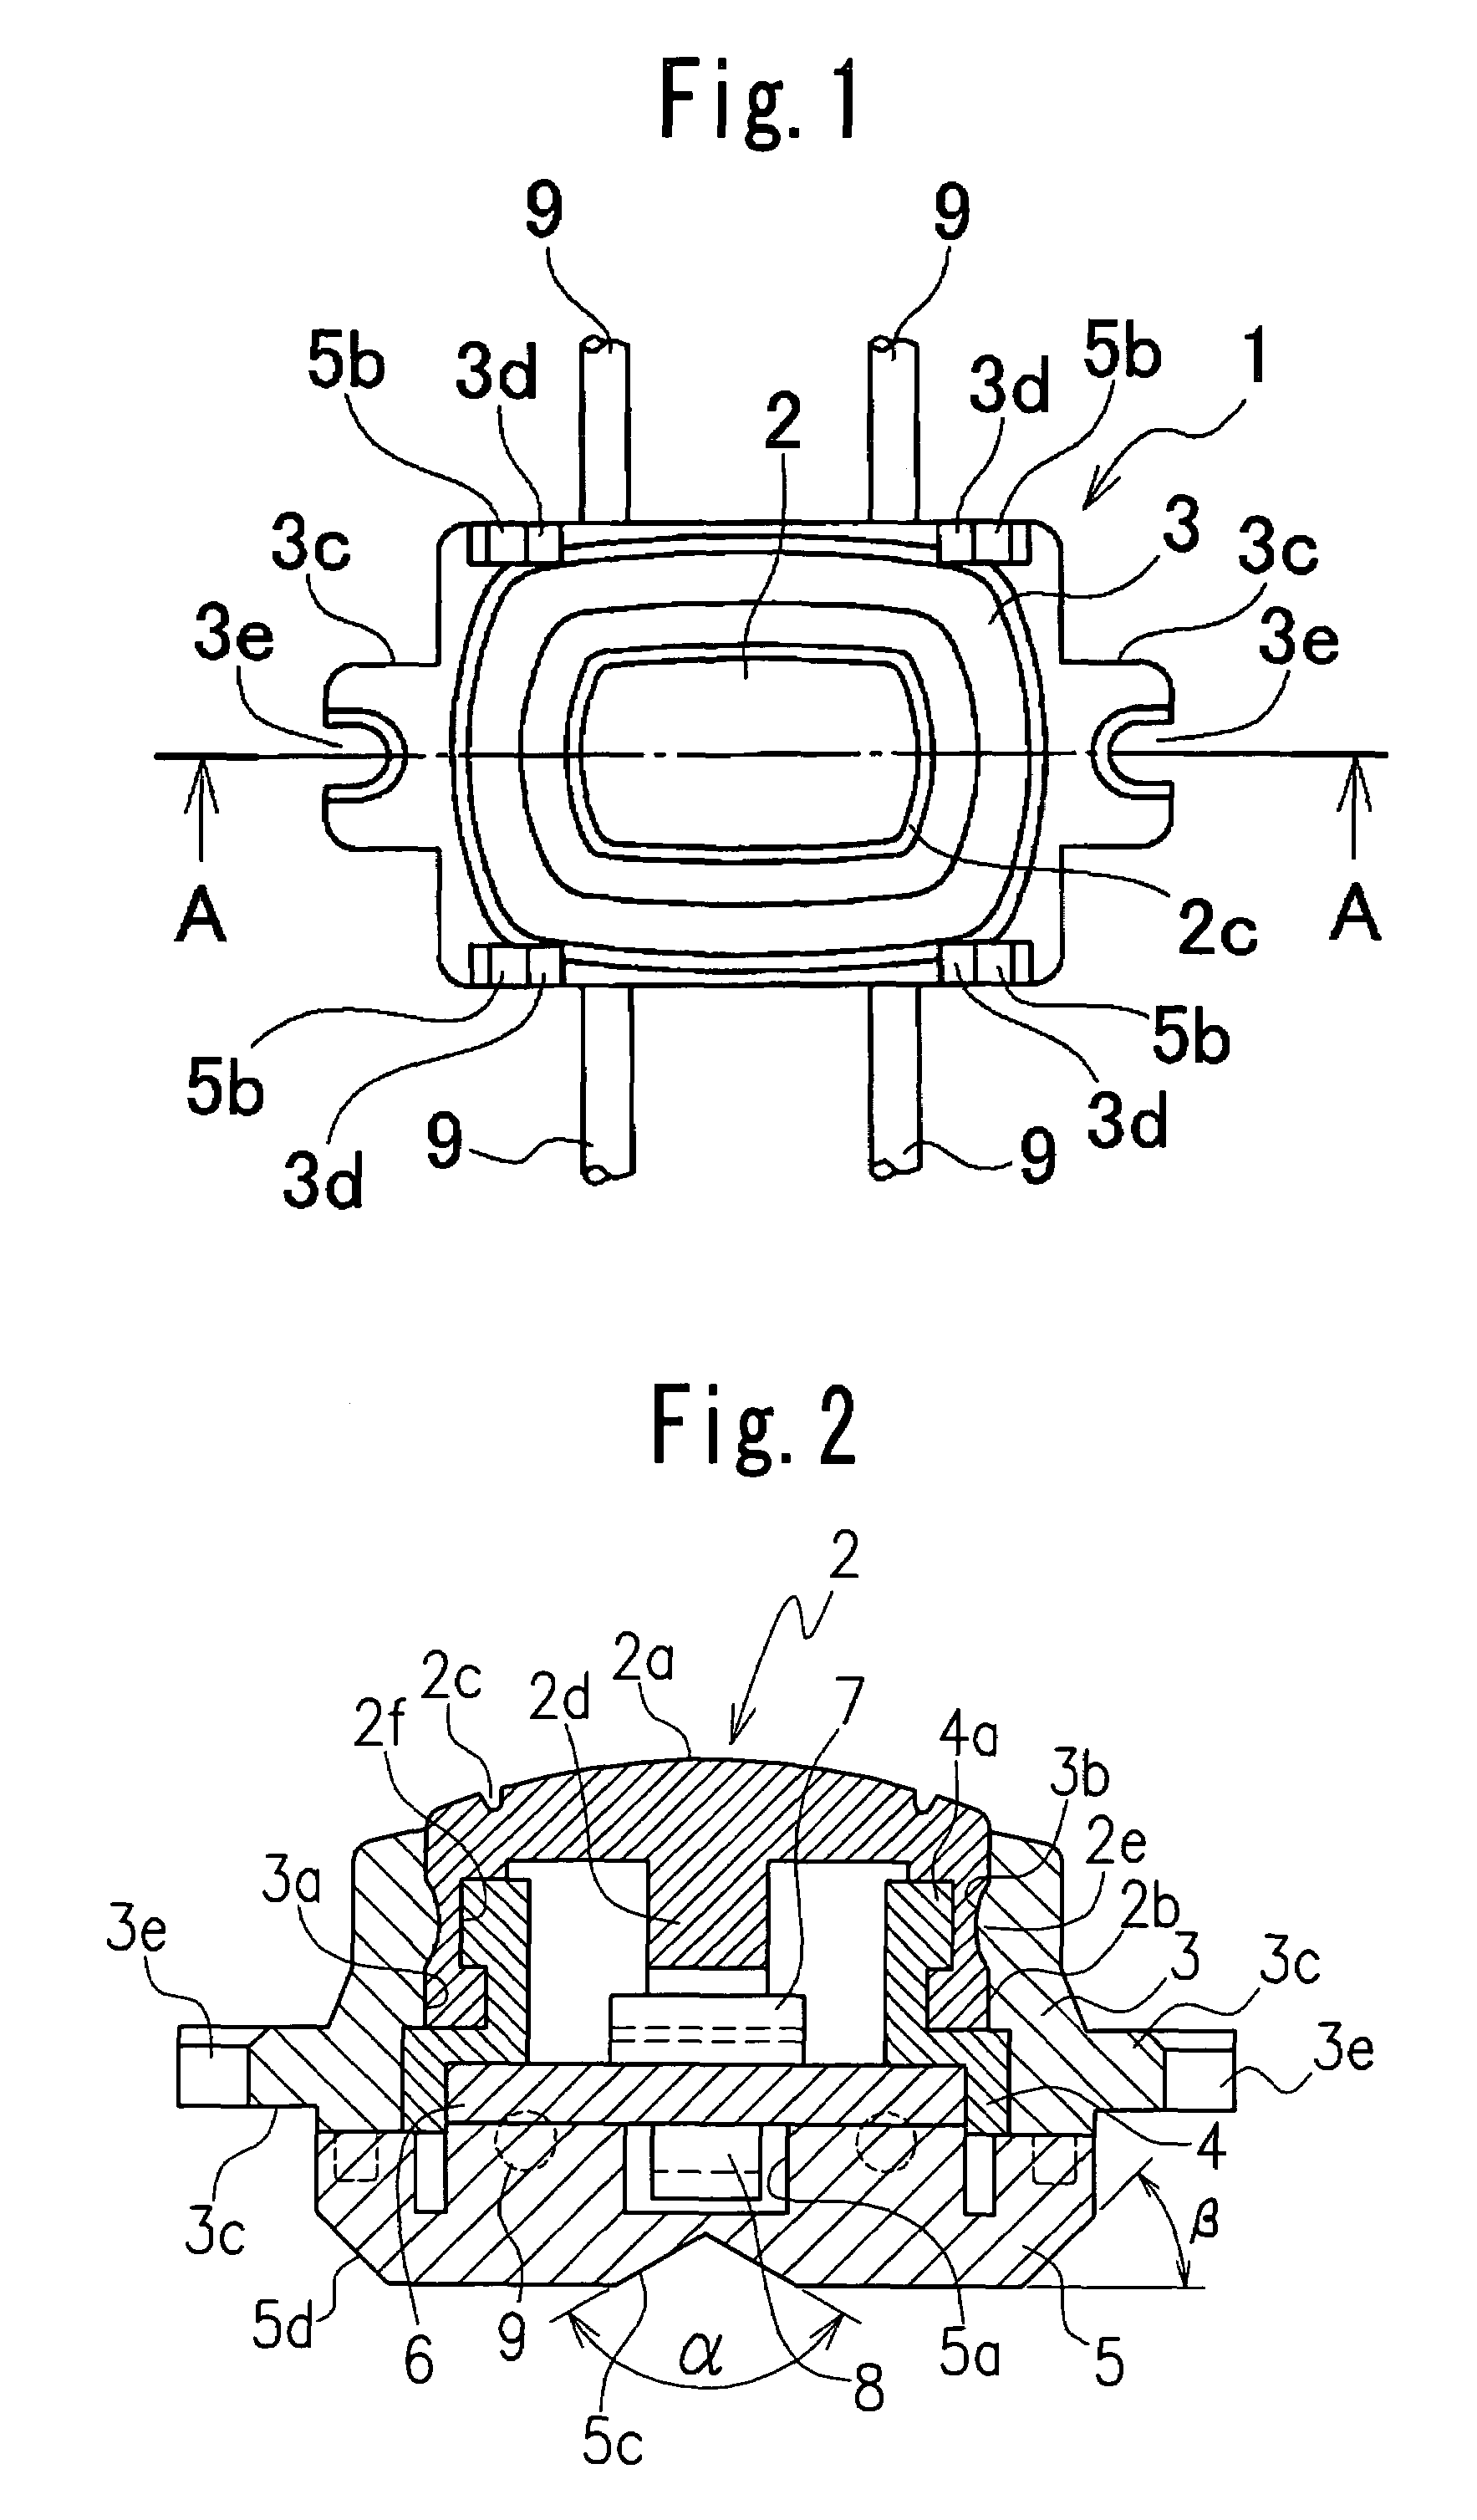 Lighted switch device